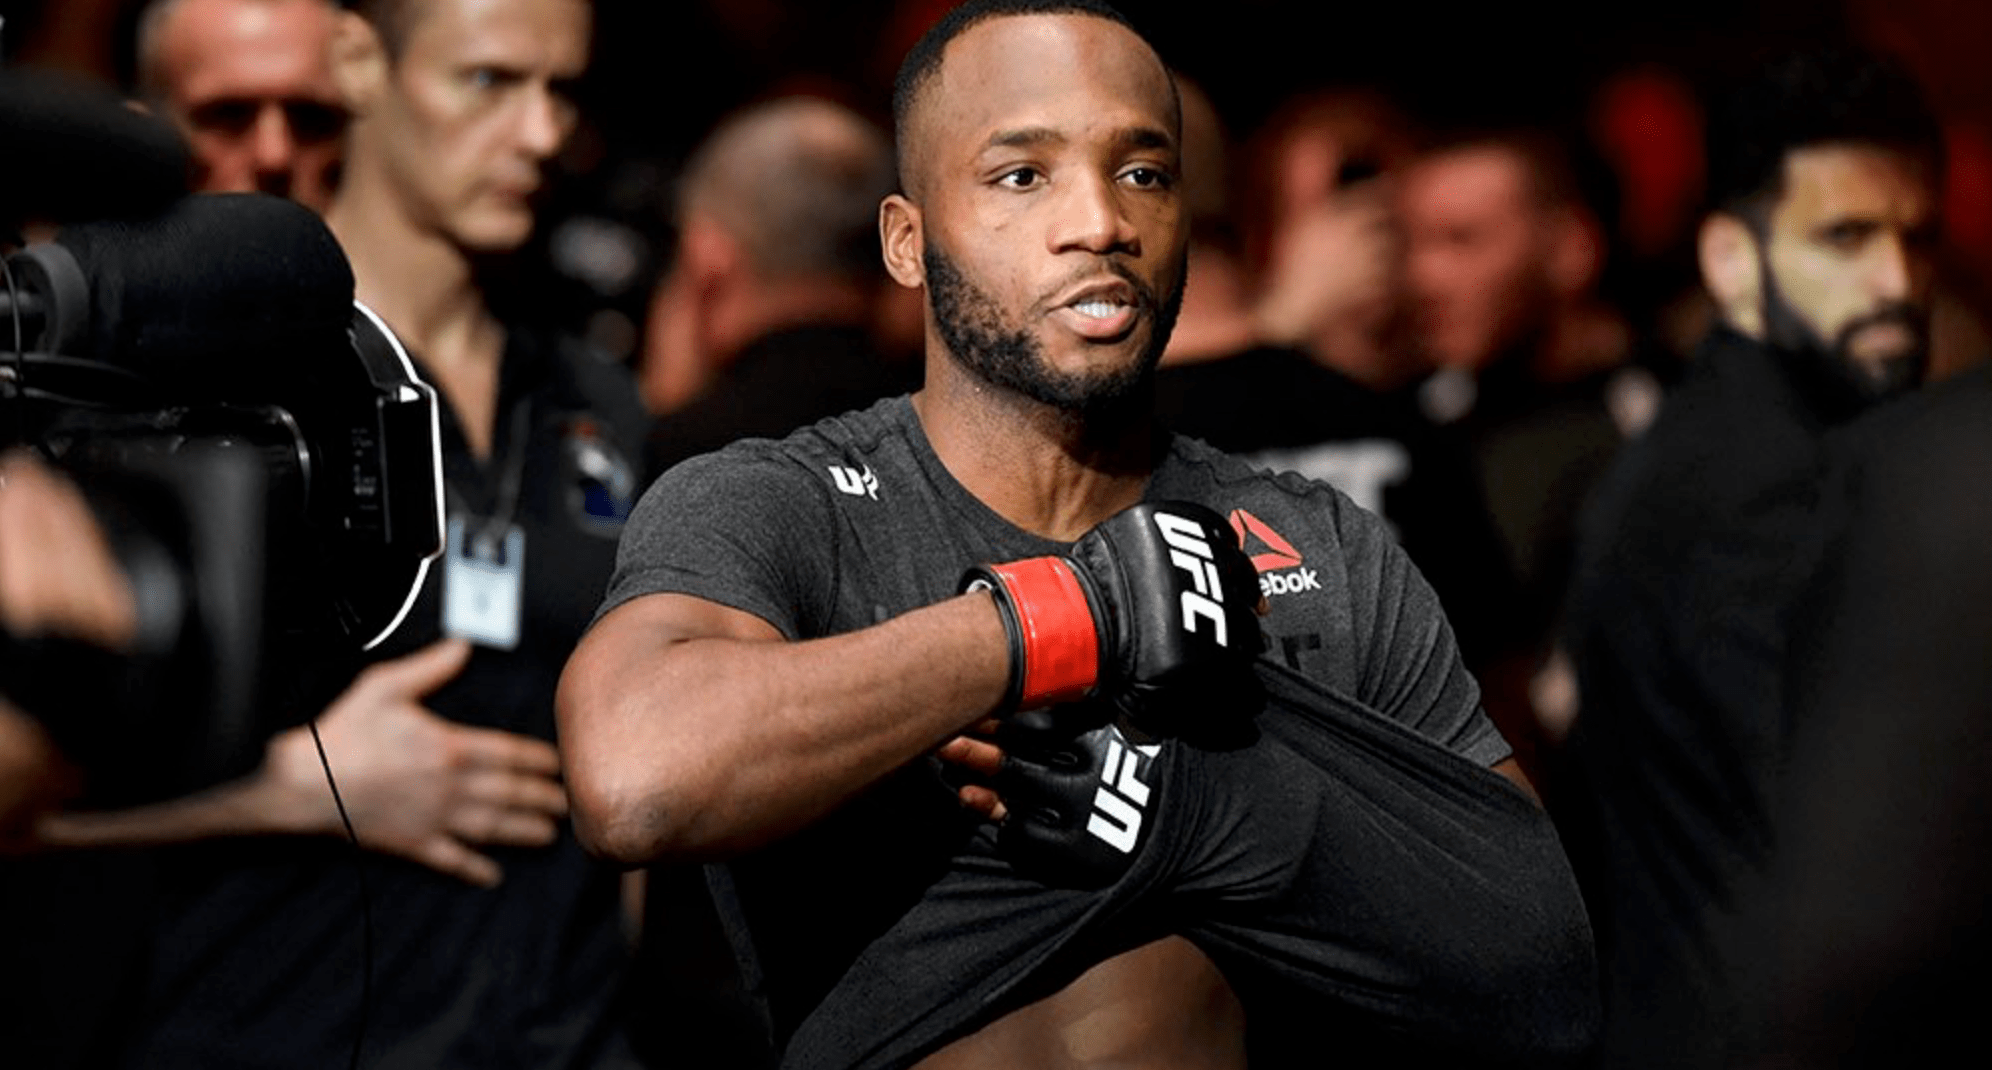 UFC – Leon Edwards: Tyron Woodley Doesn’t Want To Fight Me